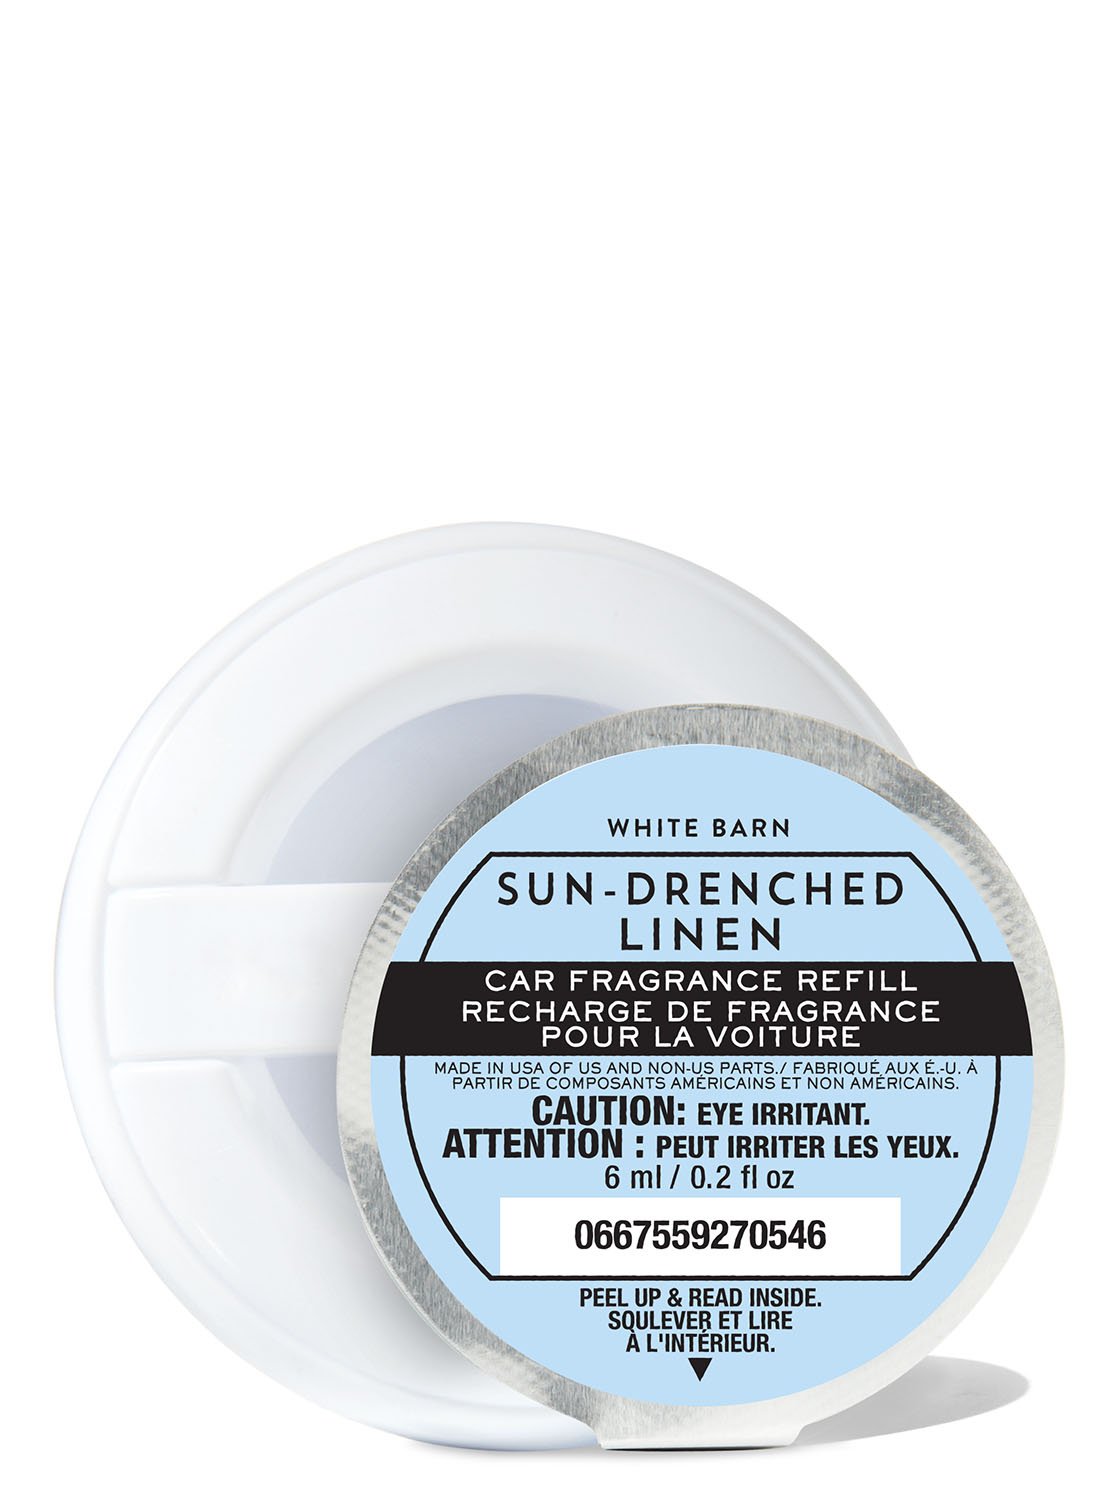 Sun-Drenched Linen Car Fragrance Refill